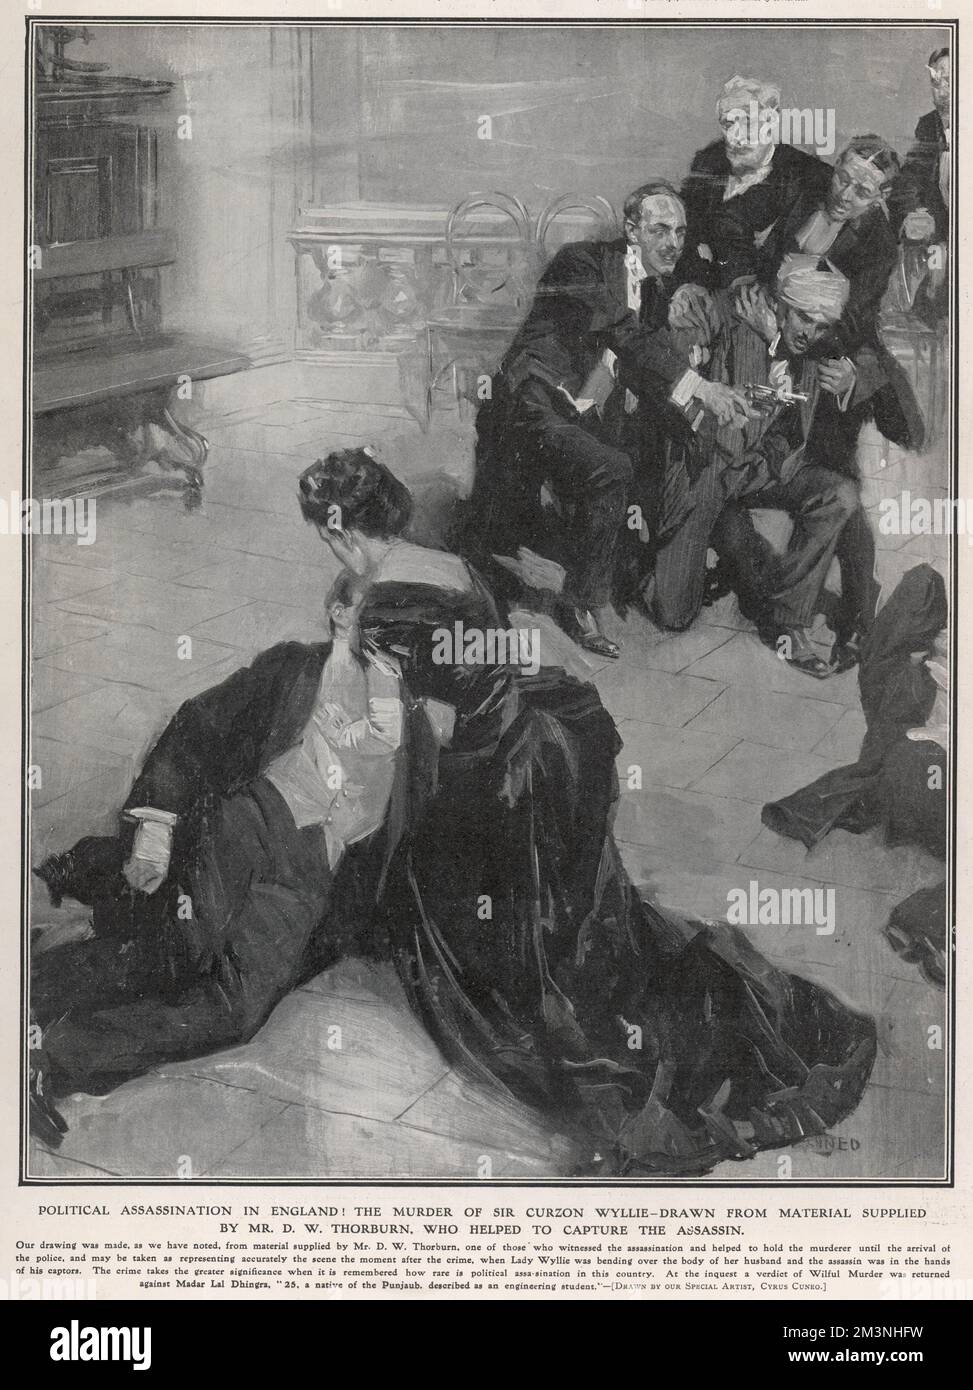 The assassination of Sir William Hutt Curzon Wyllie (1848-1909), an official of the British Indian government, at the Imperial Institute, South Kensington, London, by student and Indian nationalist Madan Lal Dhingra. The drawing was made from material supplied by eyewitness, Mr D.W. Thorburn, and shows Lady Wyllie bending over the body of her husband while Dhingra is restrained.     Date: 1909 Stock Photo